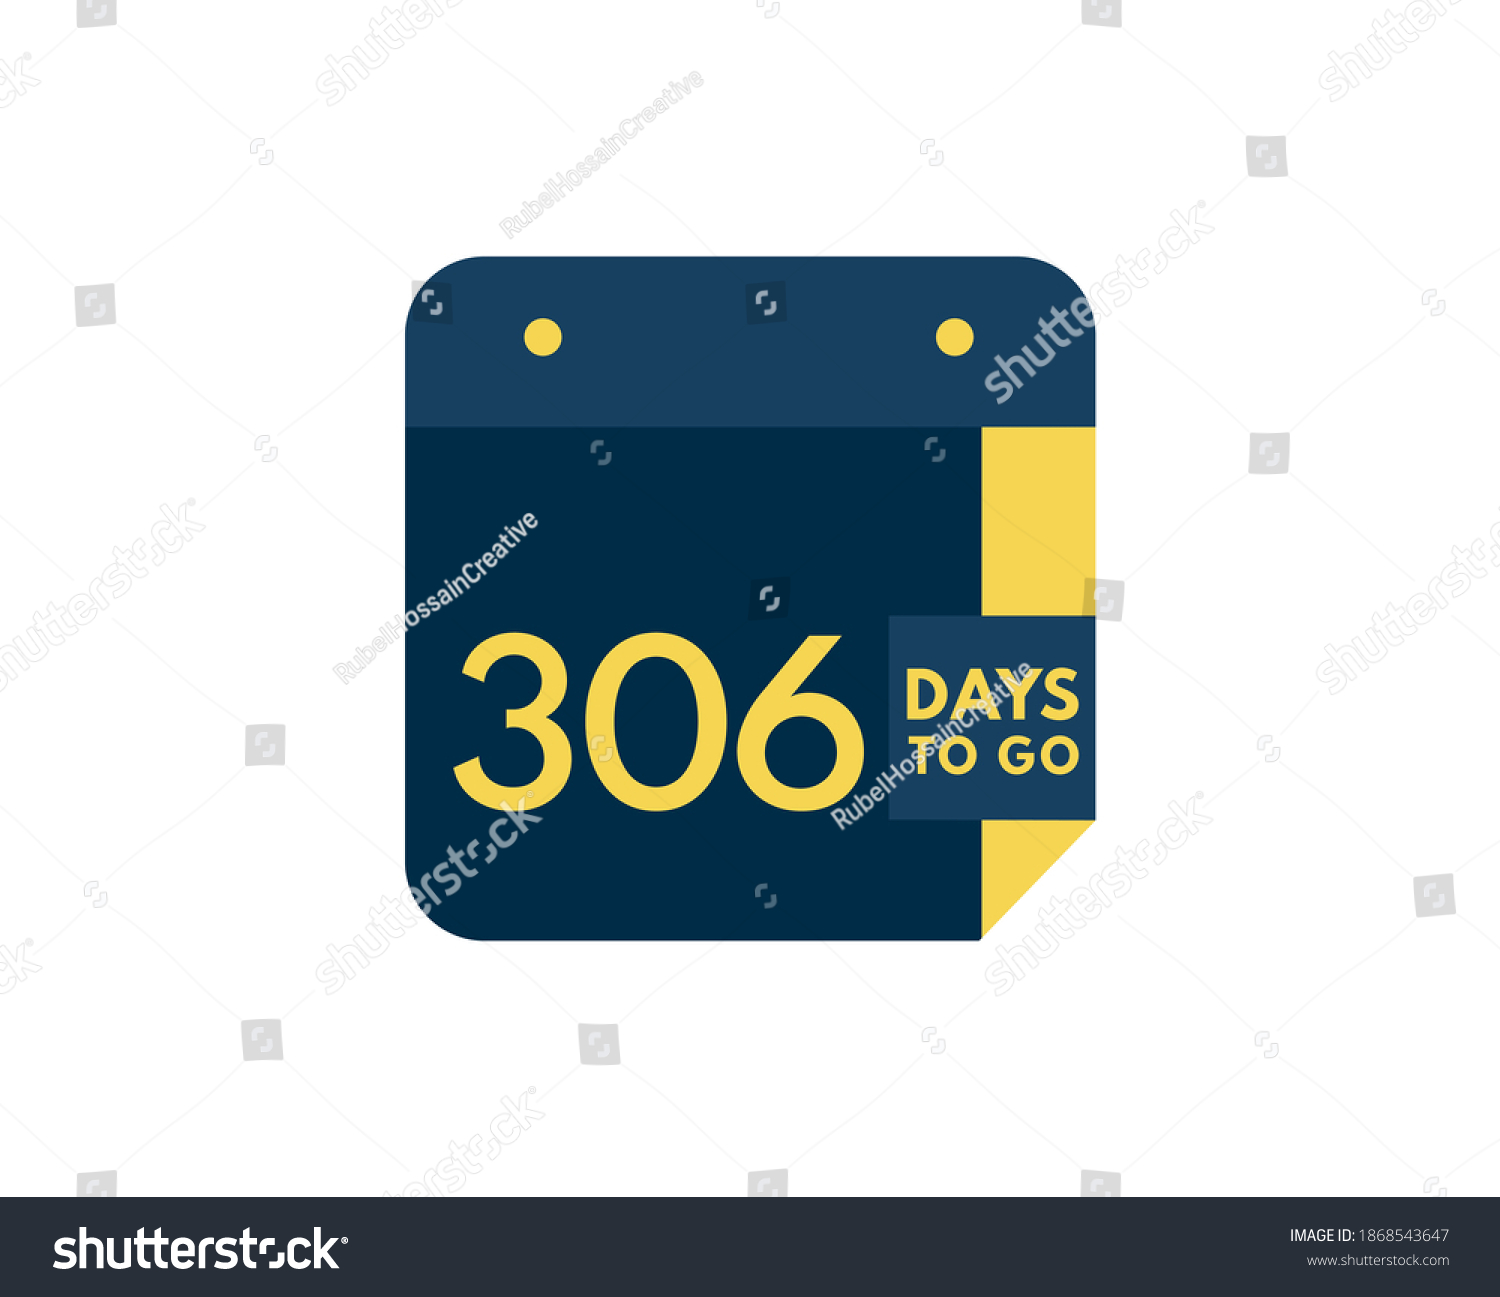 SVG of 306 days to go calendar icon on white background, 306 days countdown, Countdown left days banner image svg